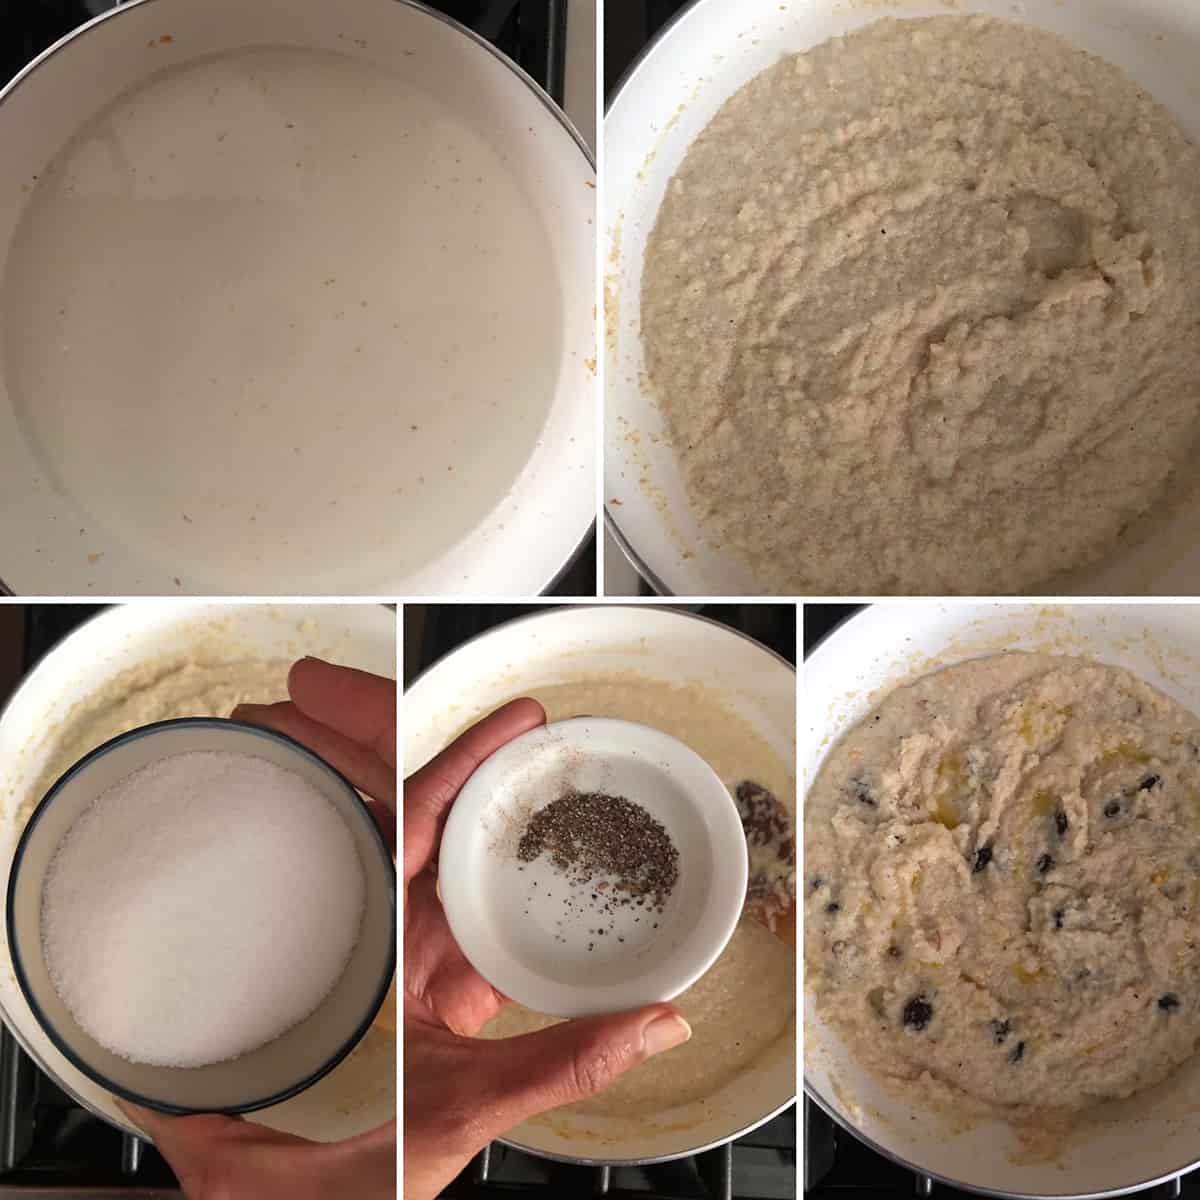 Step by step photos showing the addition of milk, sugar and cardamom